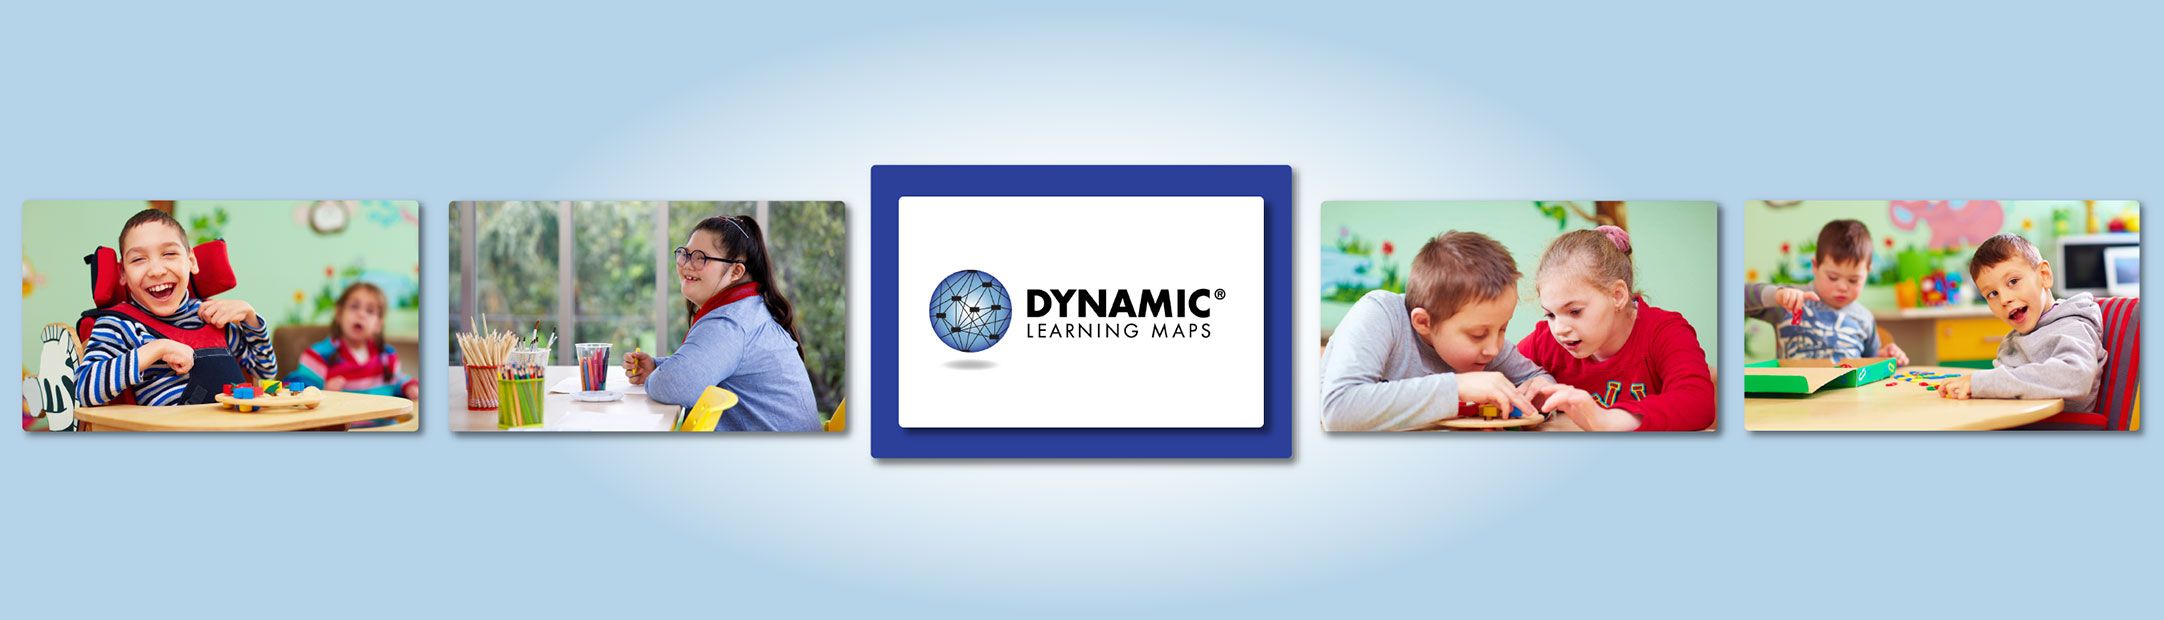 Banner image featuring children learning and playing, with the Dynamic Learning Maps logo in the center